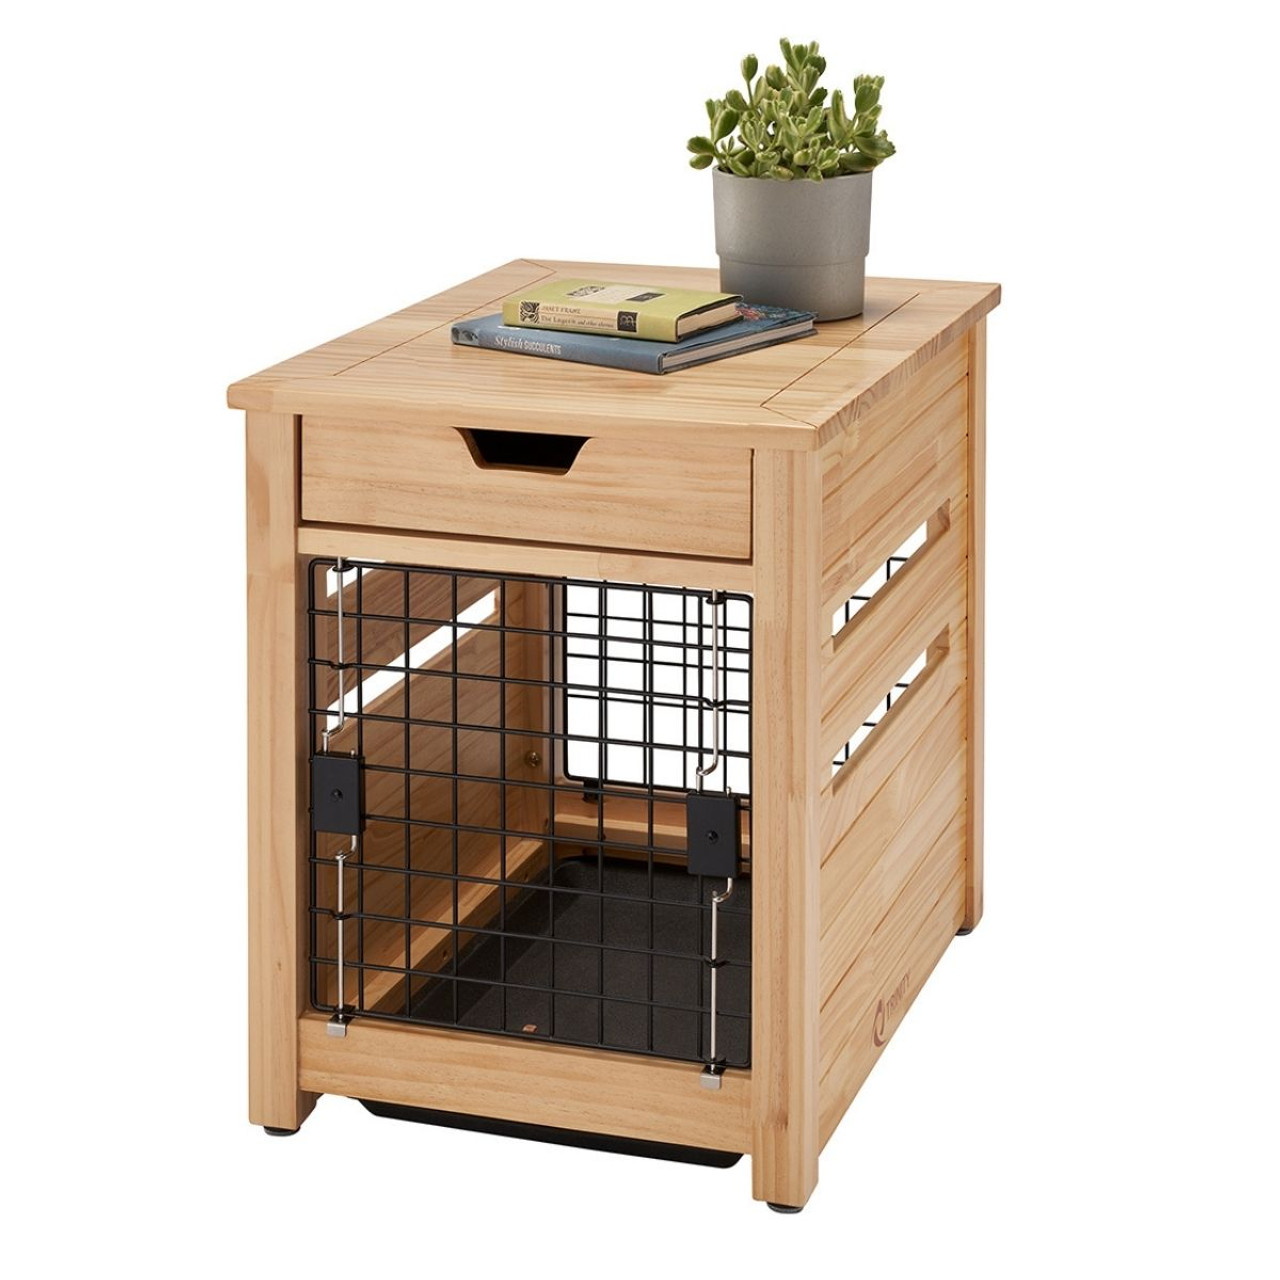 Wooden End-Table Dog Crate